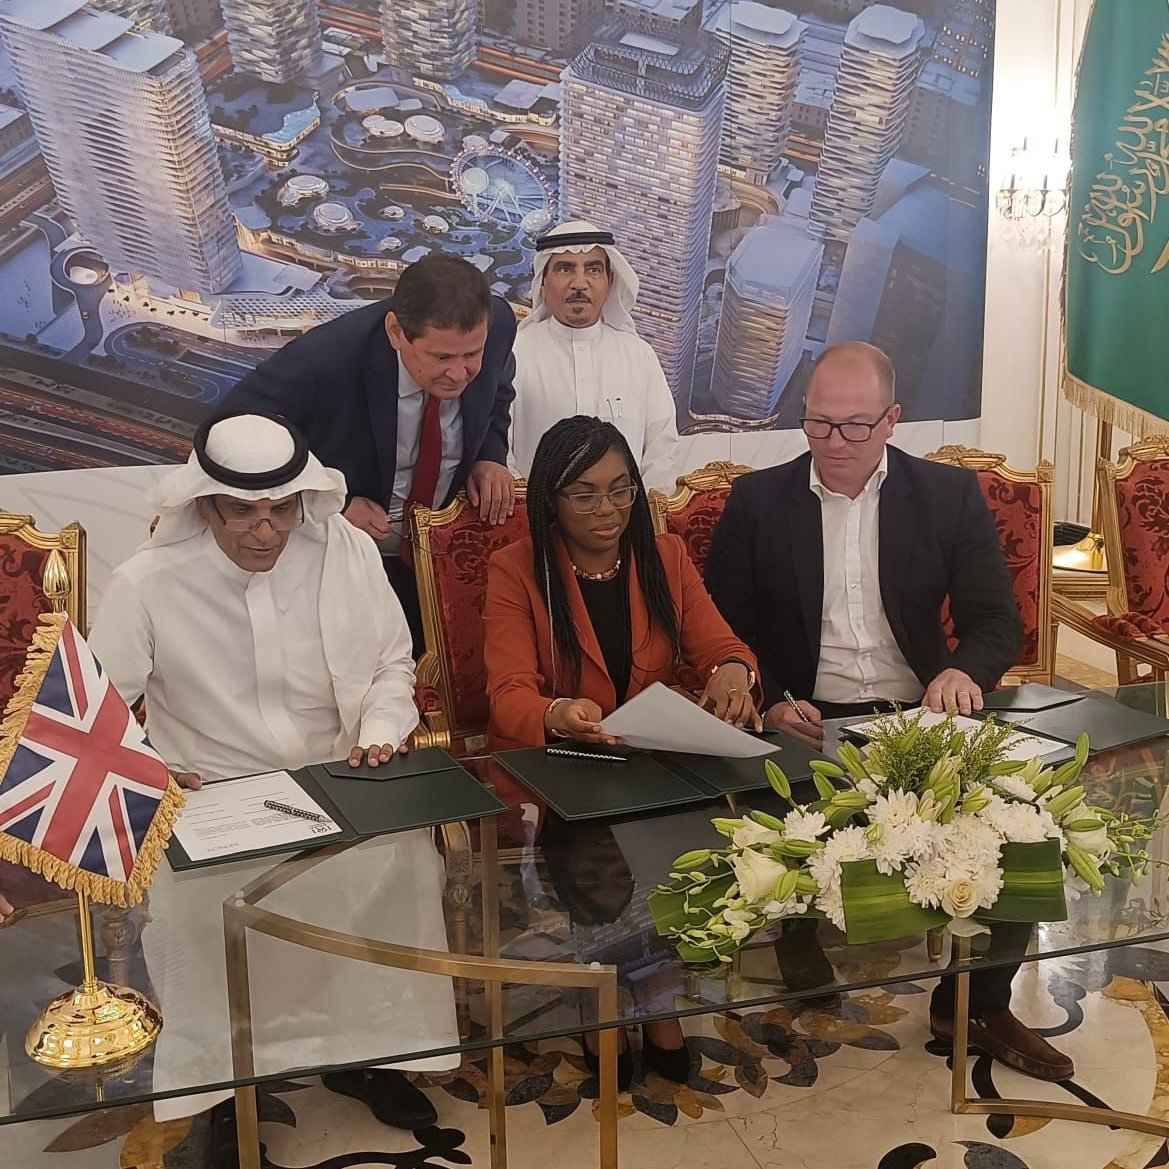 Delighted to announce @BenoyGlobal have signed a contract with Abdullah Al Othaim Investment Company to work on the Konoz project, a cutting-edge entertainment city in the heart of Riyadh. The design enables economic prosperity, positive well-being and sustainable development.